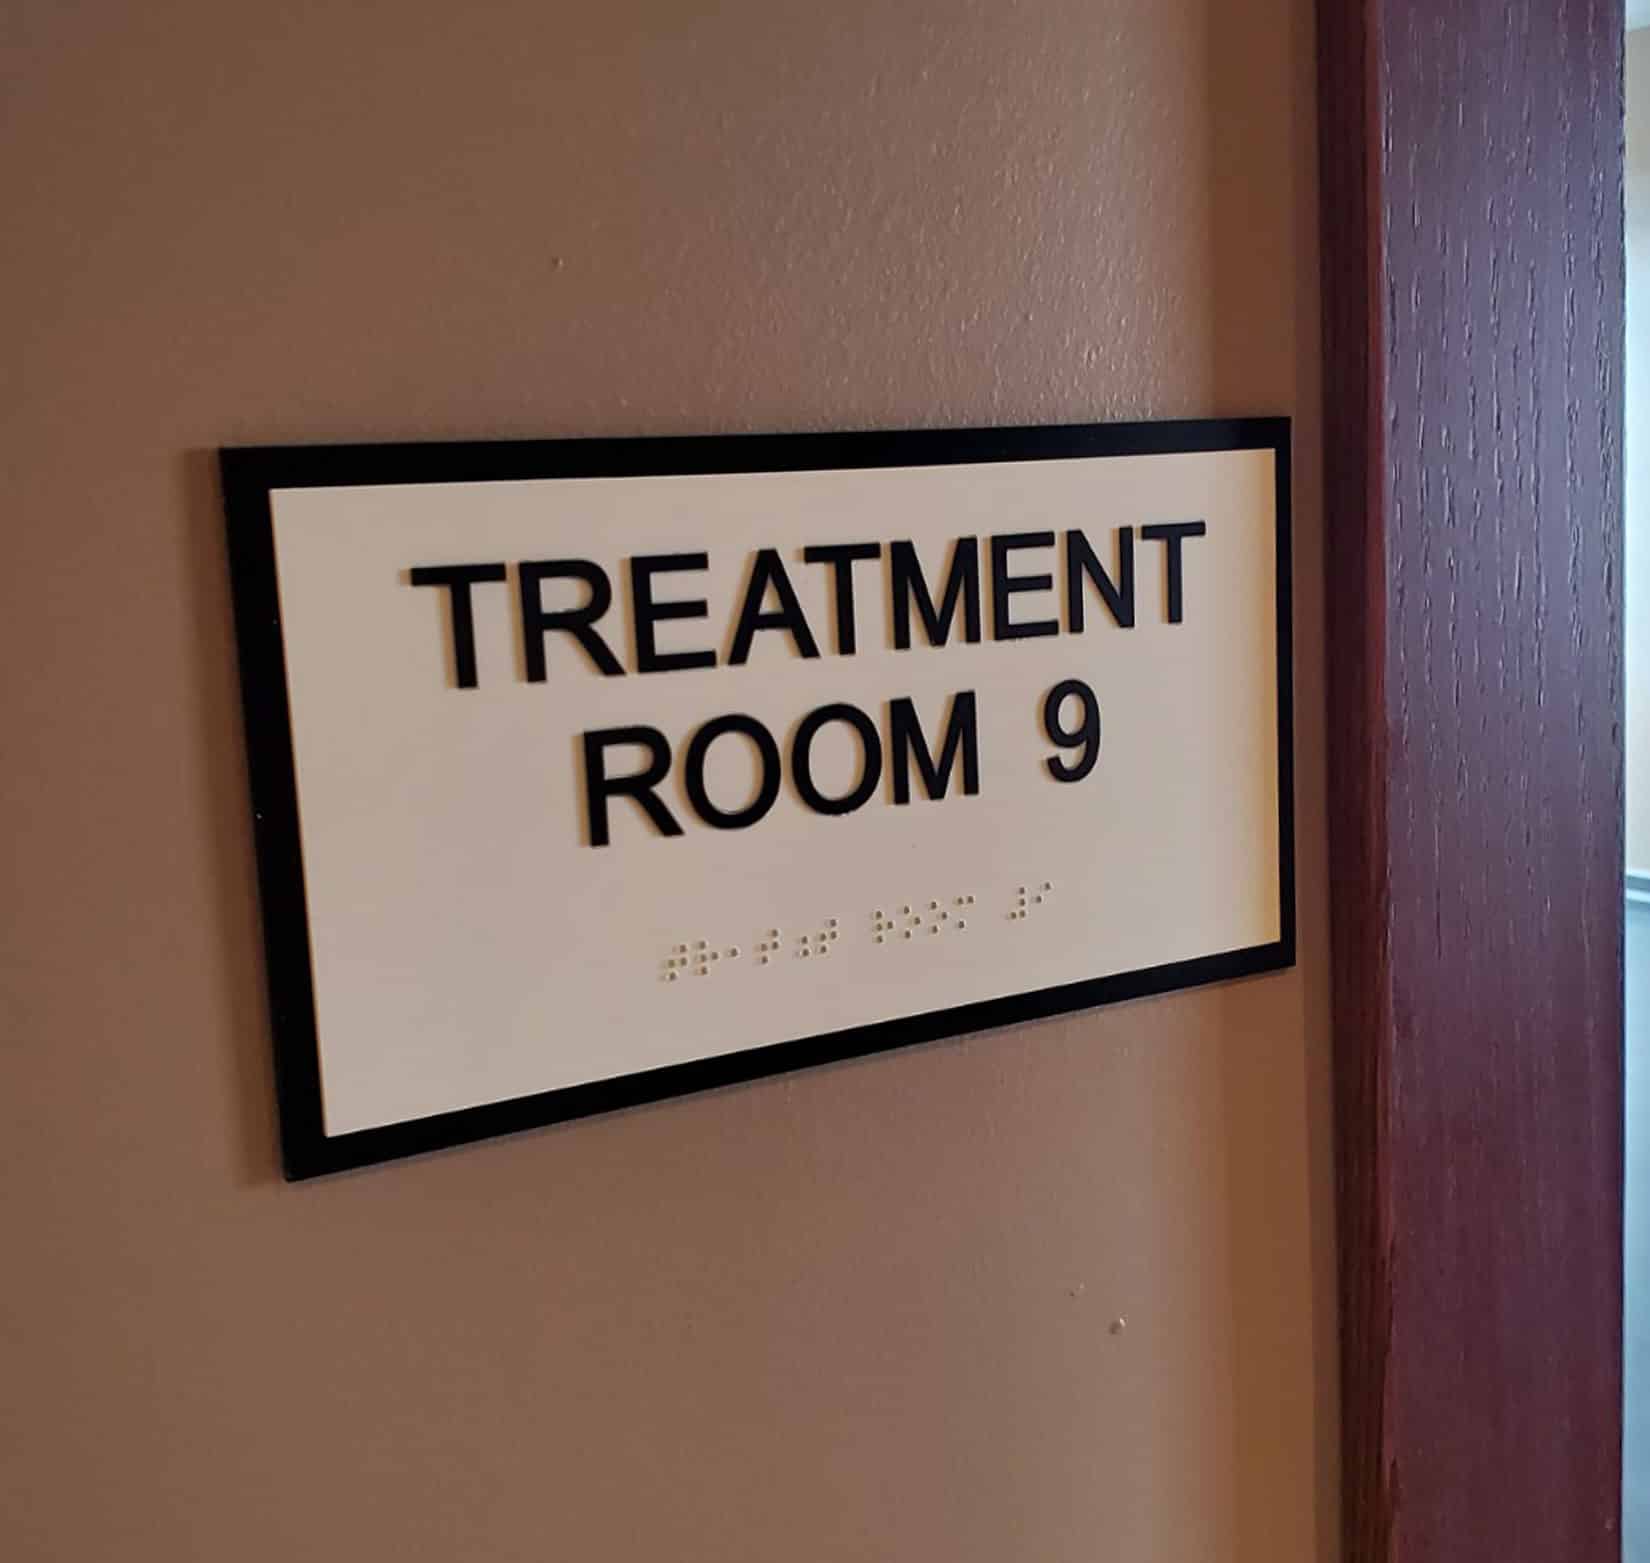 A wall sign that says “Treatment Room 9” in all caps black text on a white background.